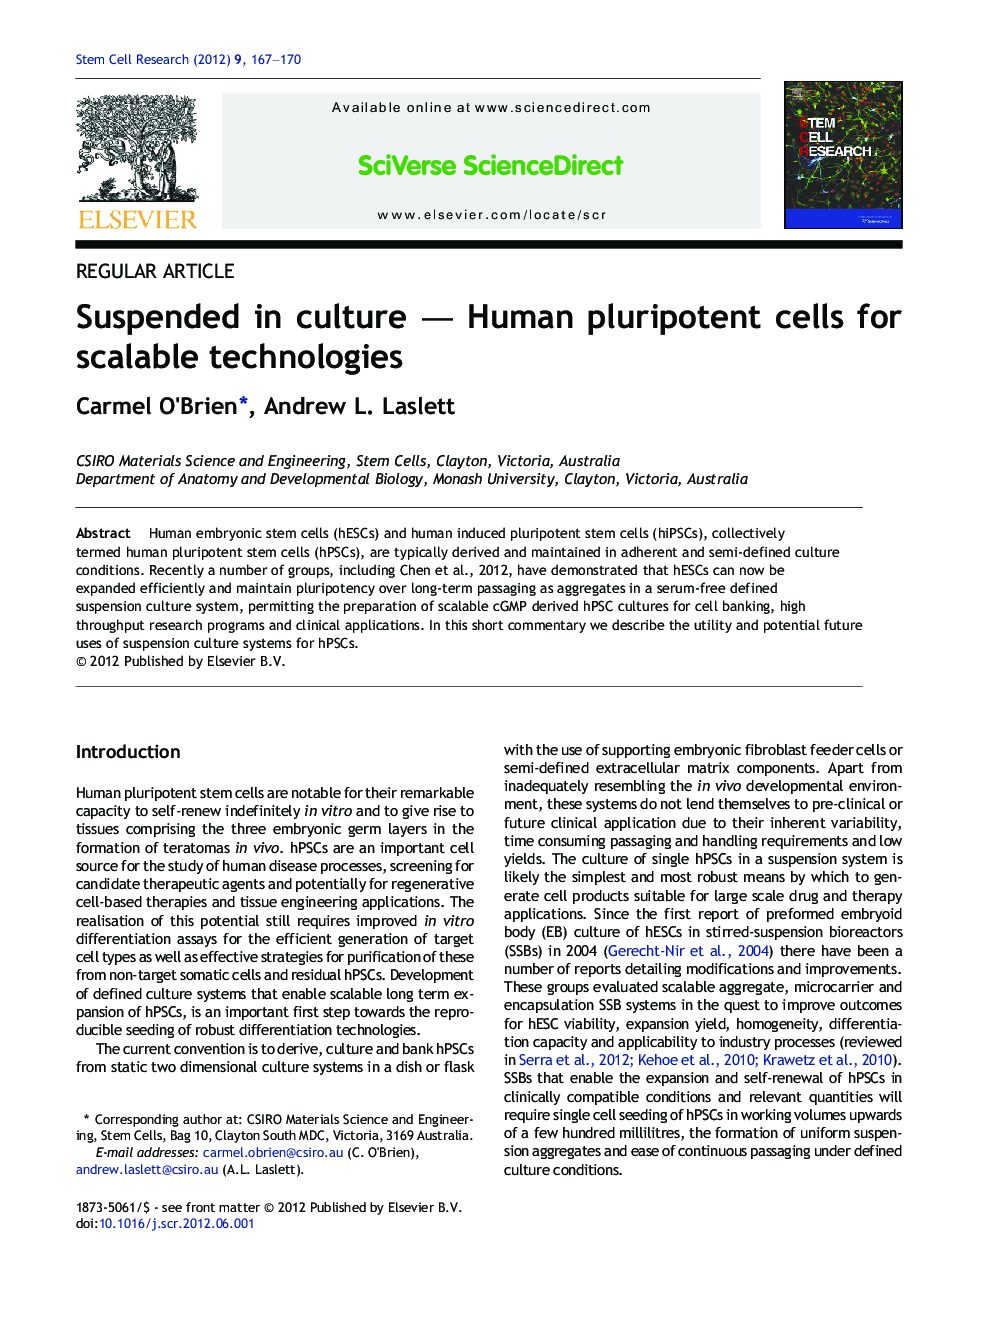 Suspended in culture — Human pluripotent cells for scalable technologies